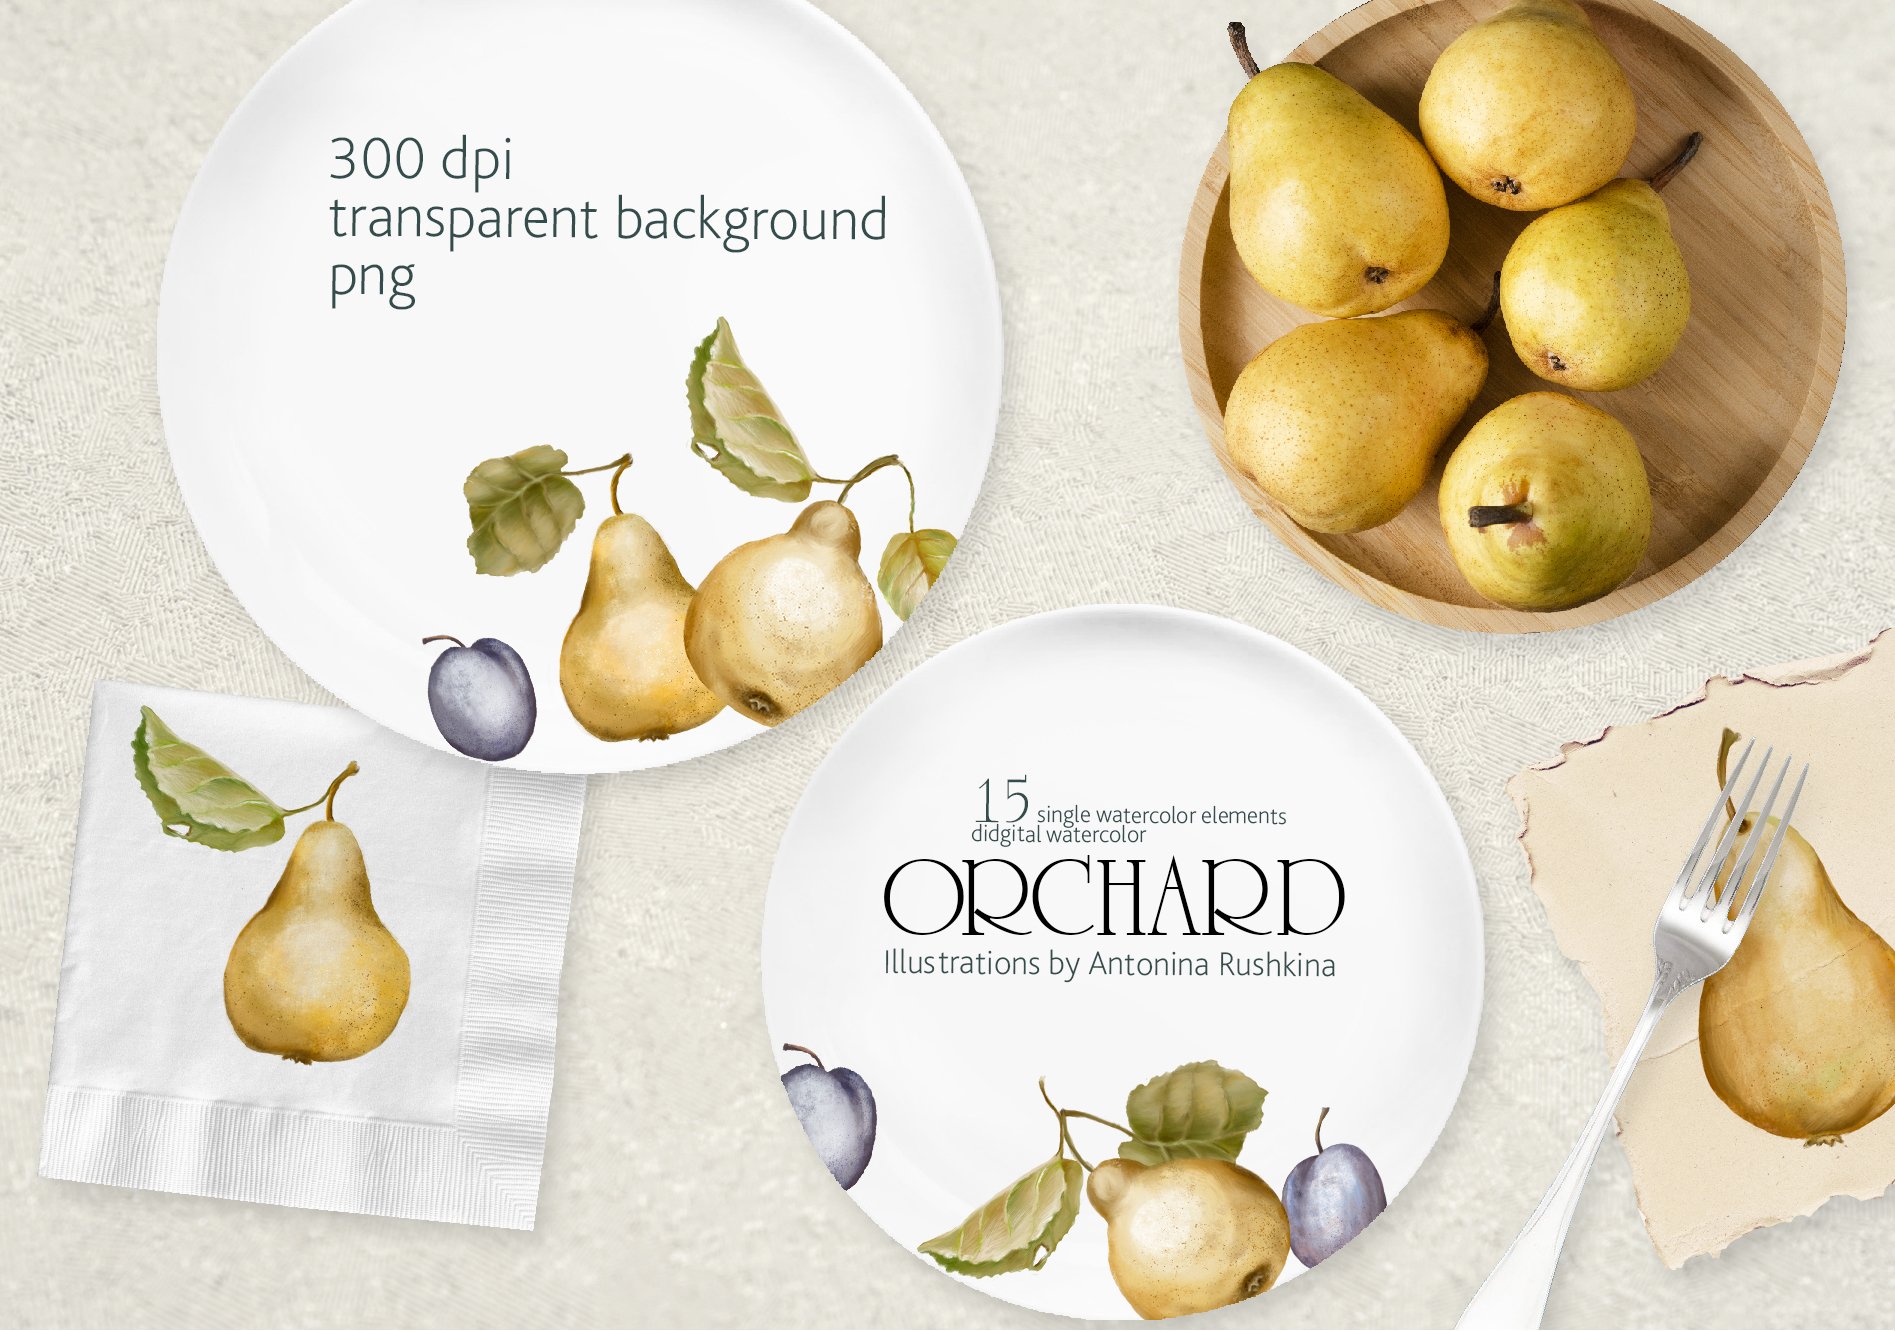 Orchard fruit. Pears and plums preview image.